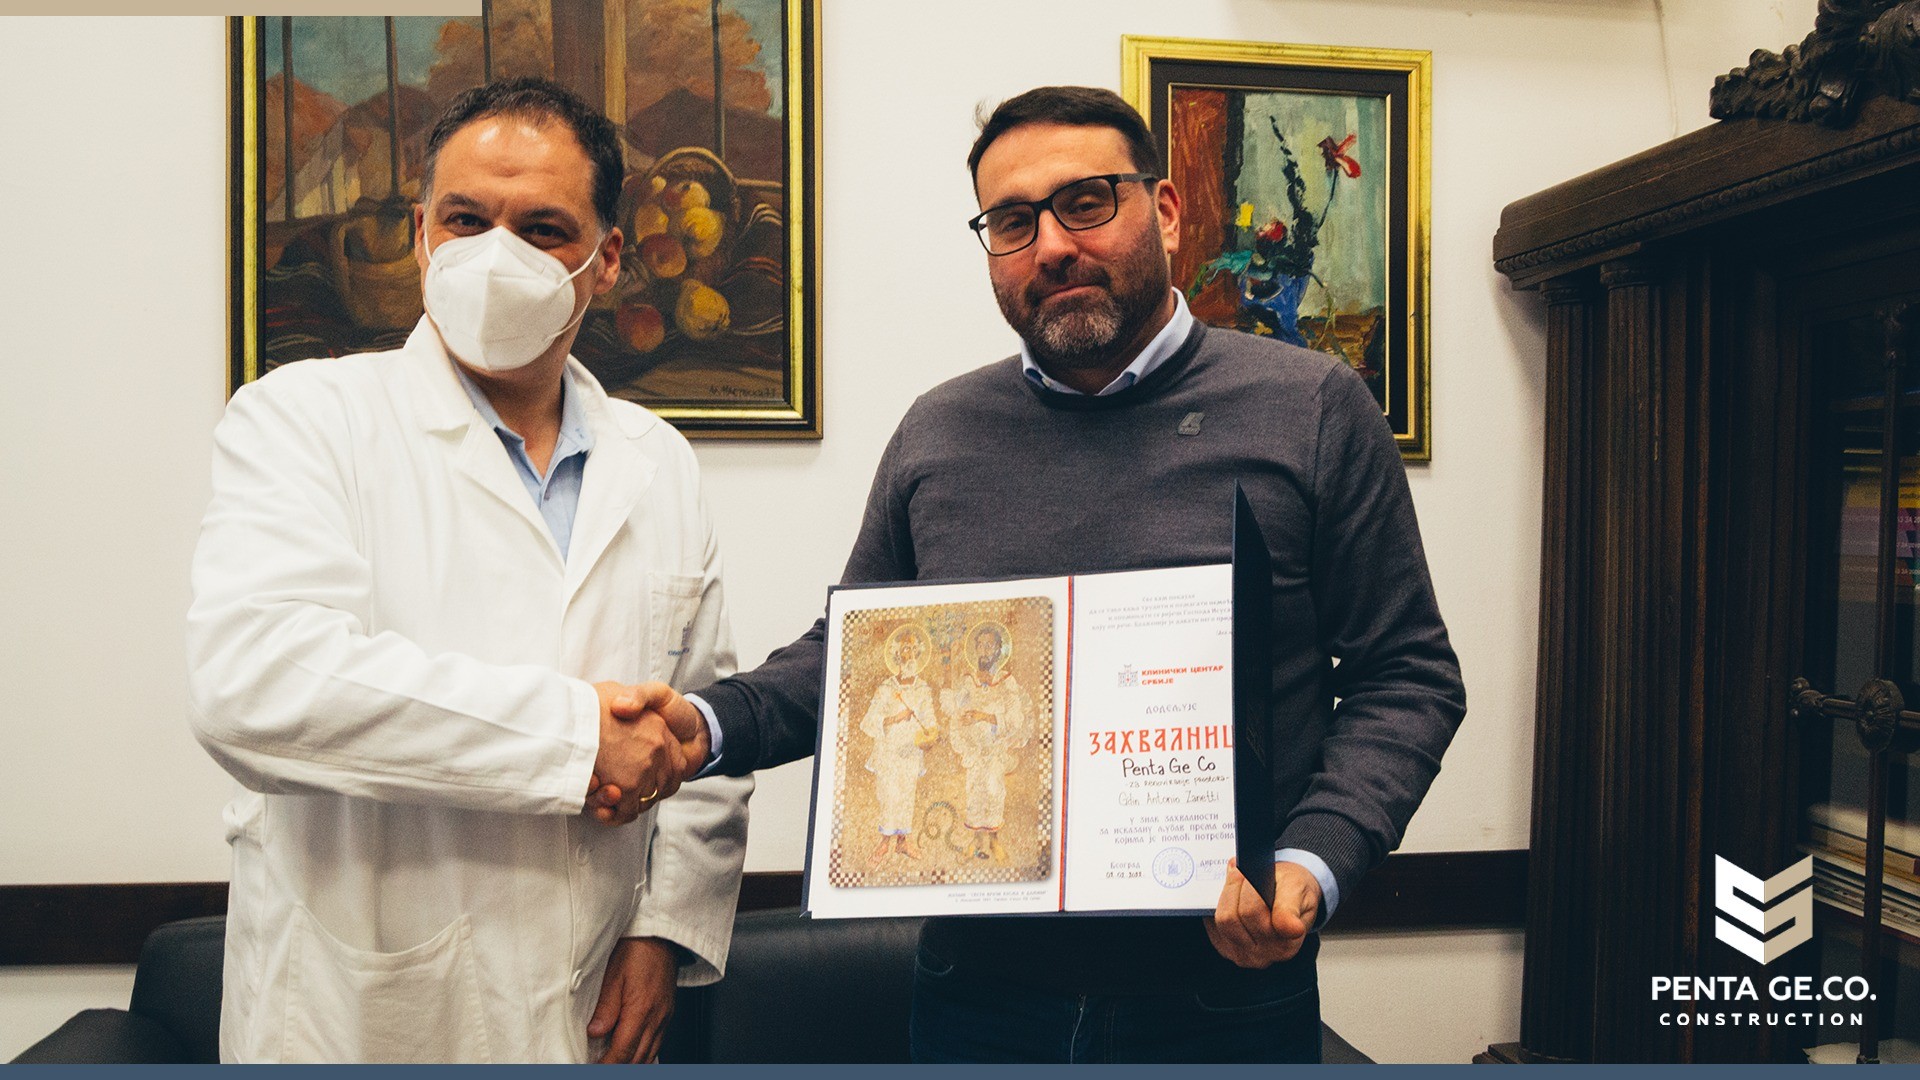 Donation to the Clinic for Pulmonology of the Clinical Center of Serbia